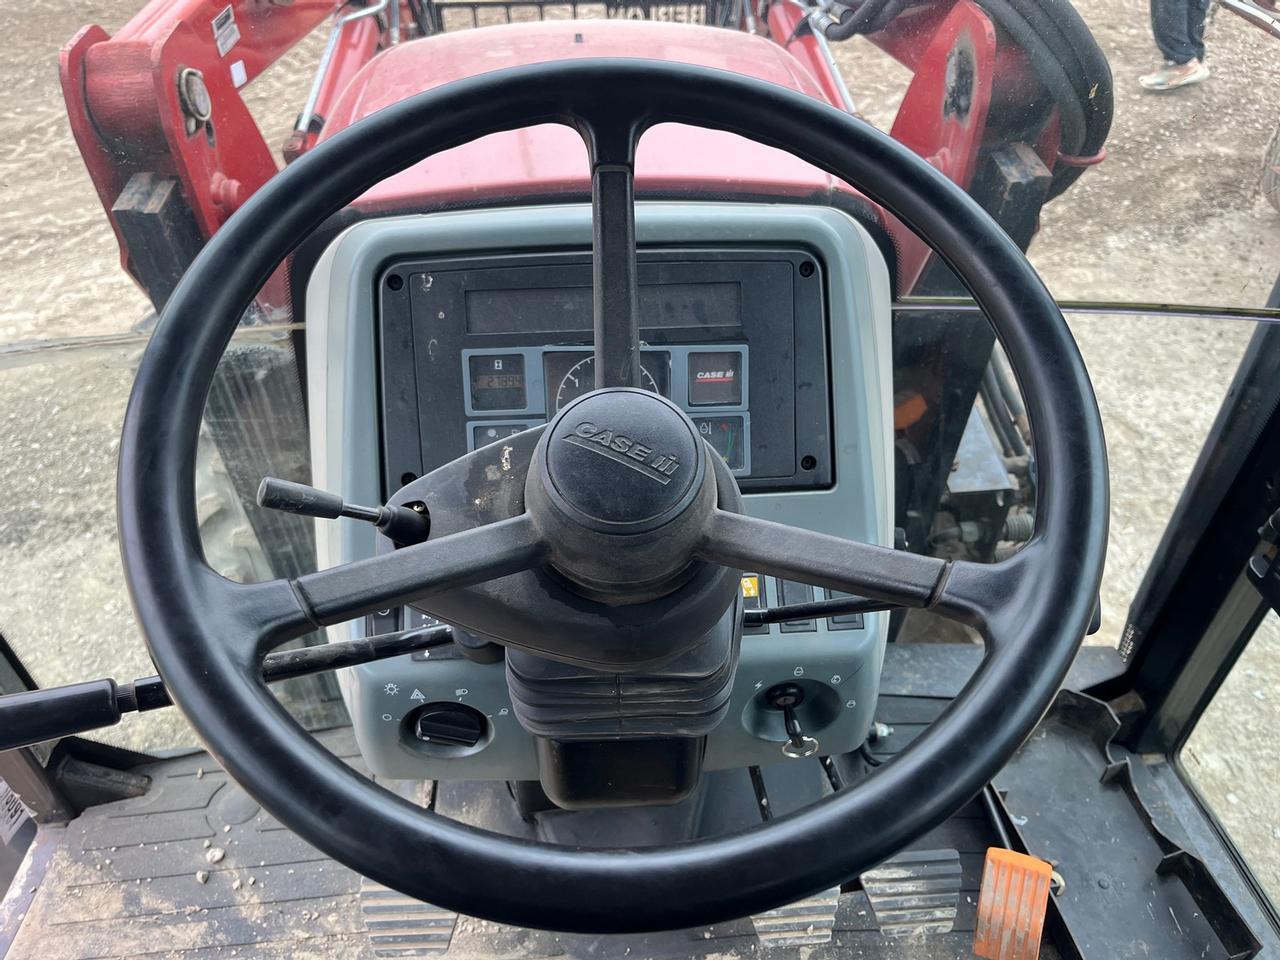 Case IH CX80 Tractor with Loader